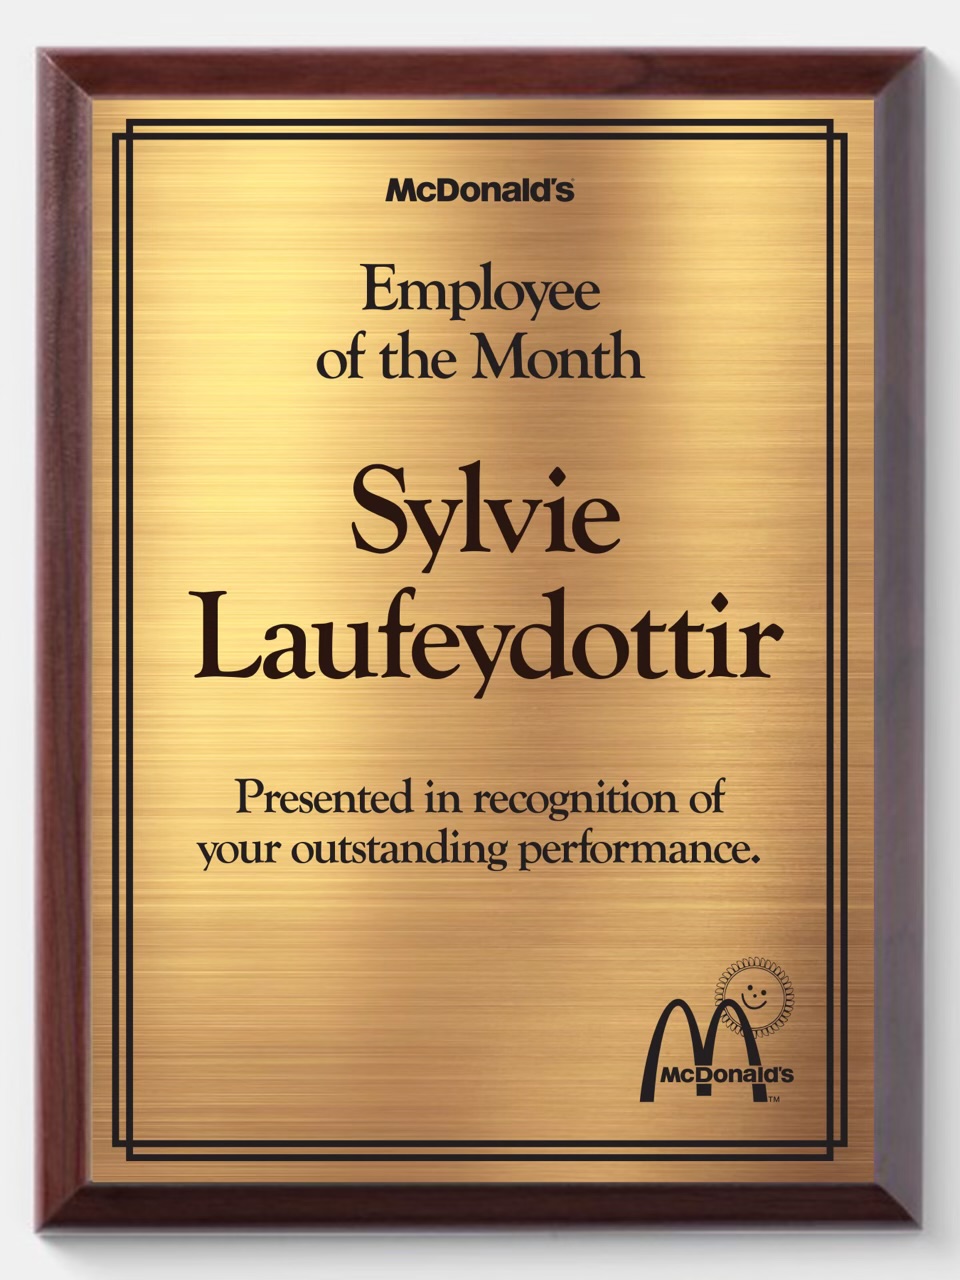 McDonald's employee of the month plaque celebrating Sylvie for her Achievements.